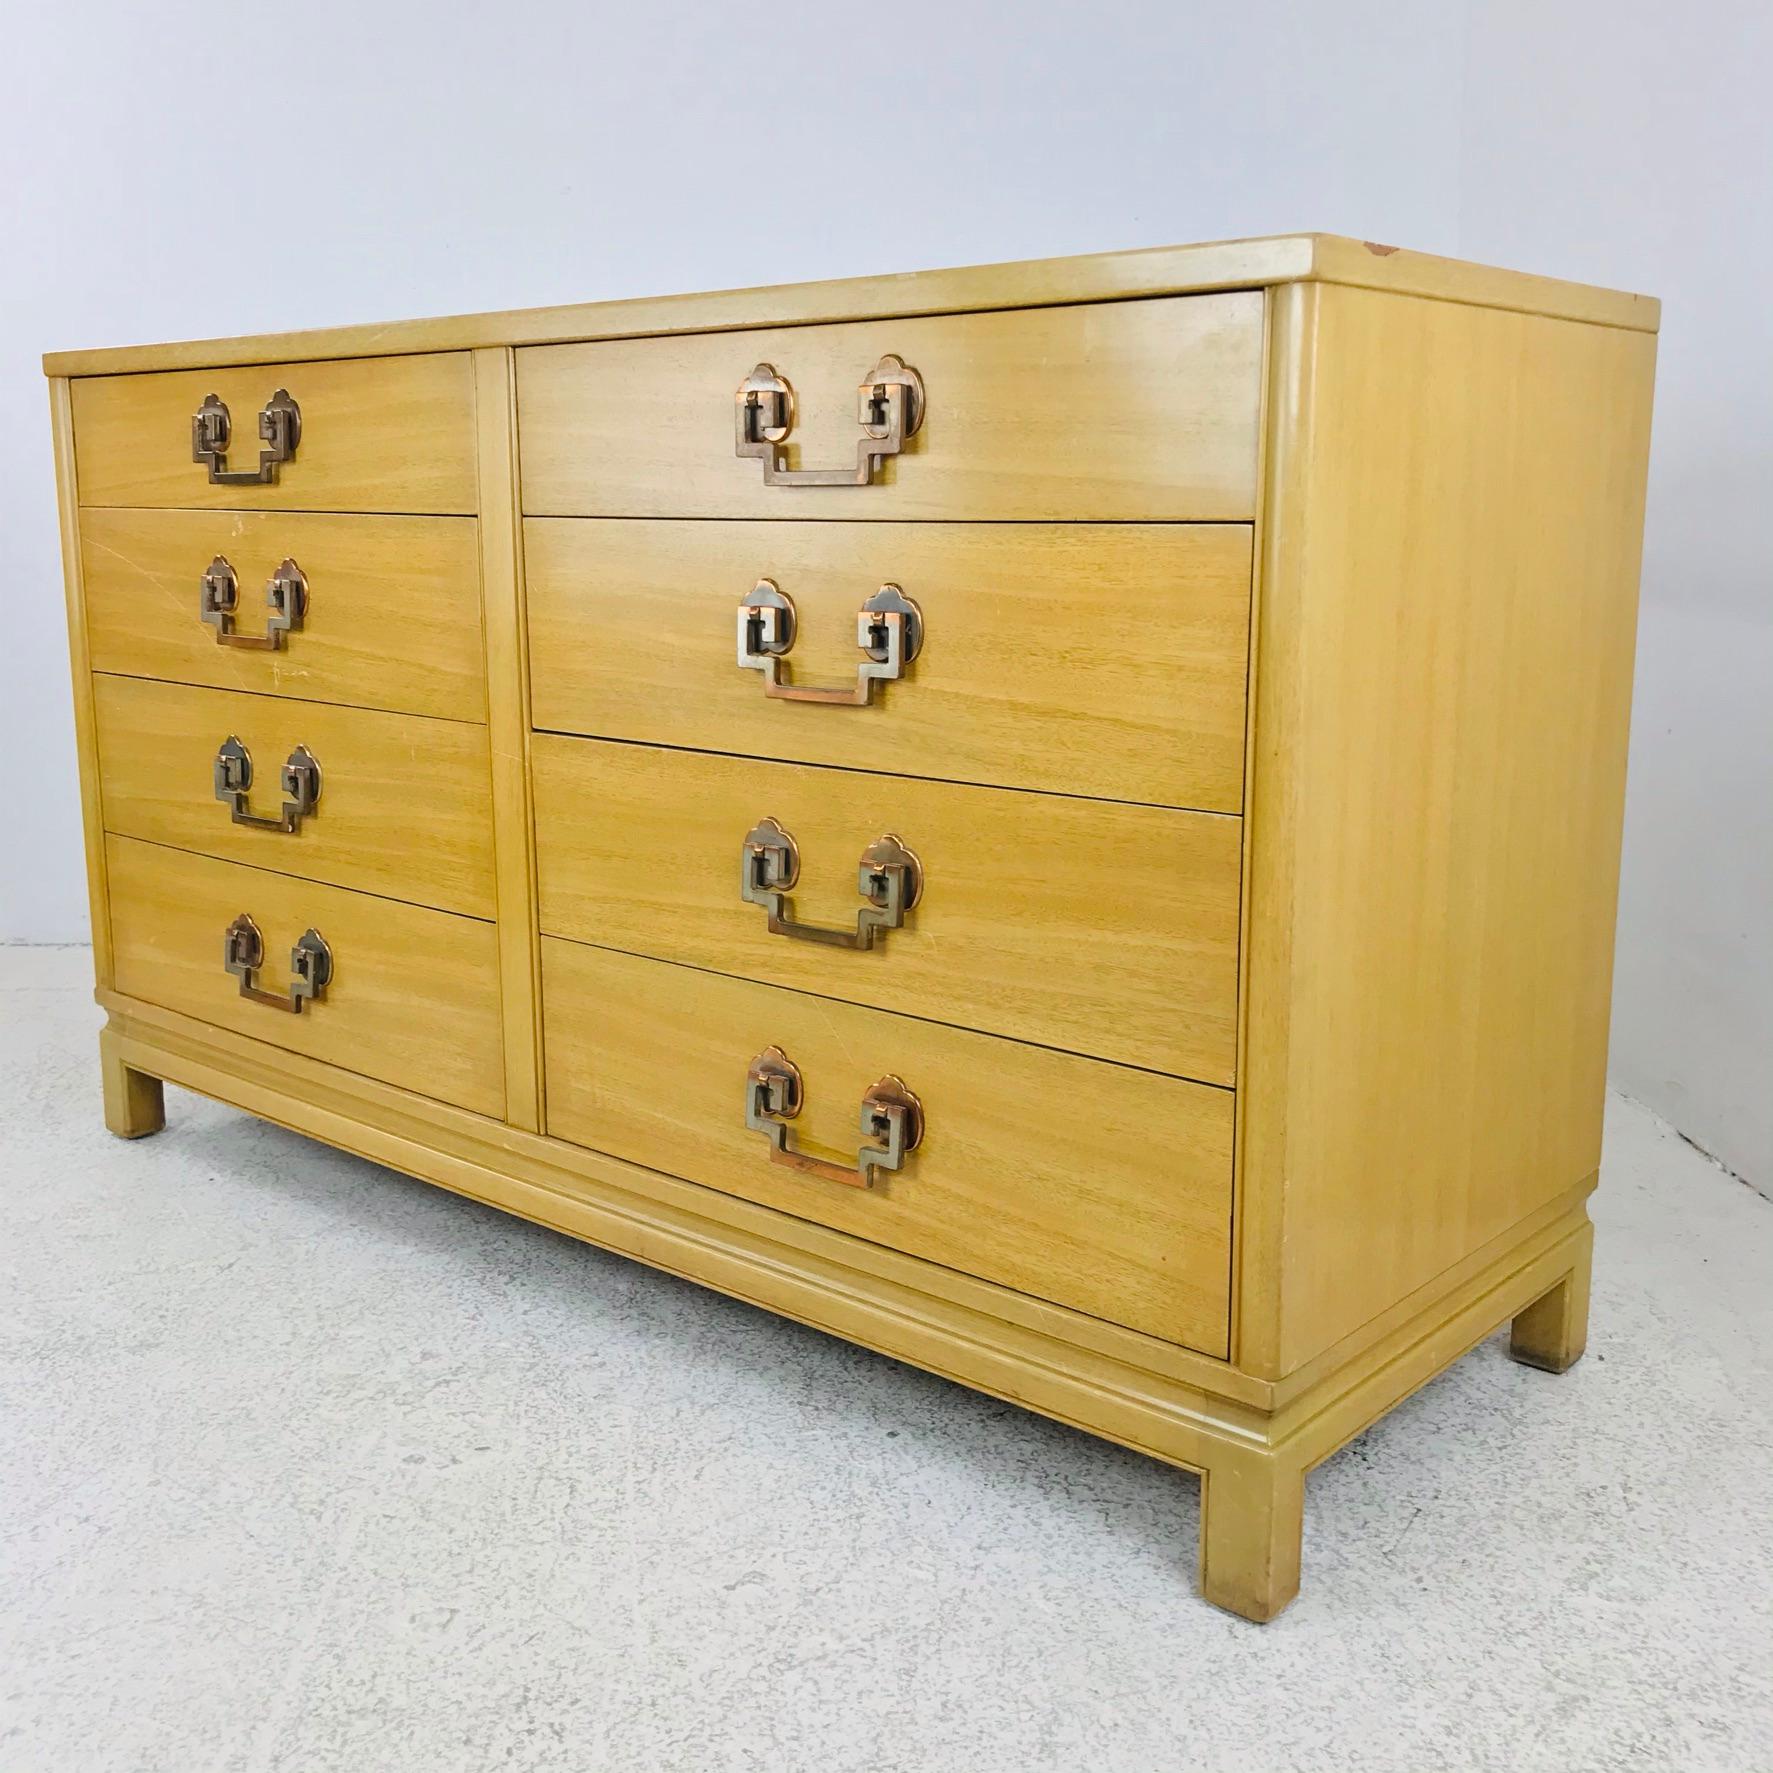 A handsome eight-drawer bleached mahogany dresser made by Landstrom. Features beautiful hardware made of Greek key motif over quatrefoil design.